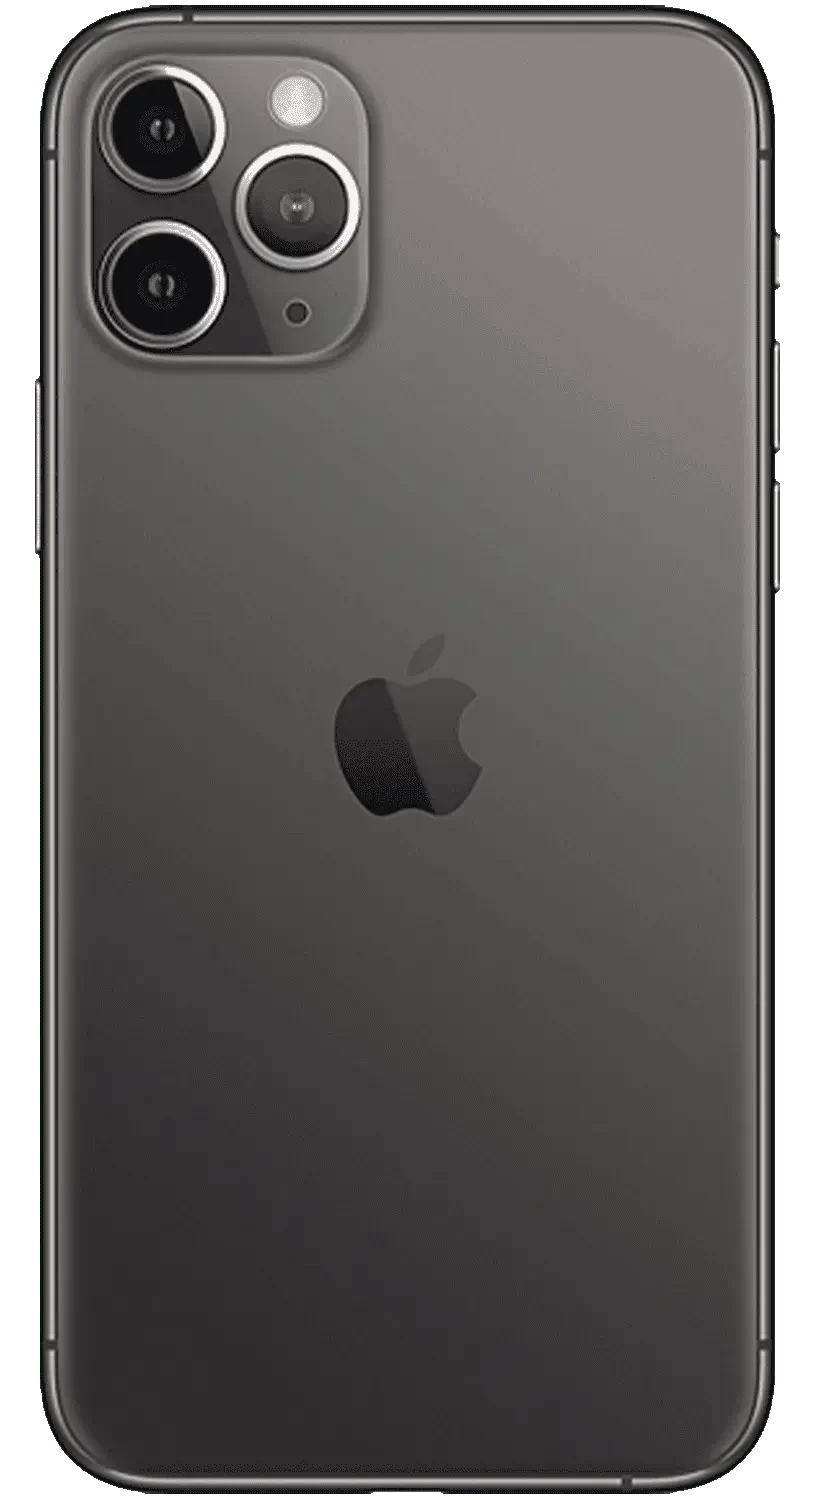 iphone 11p front